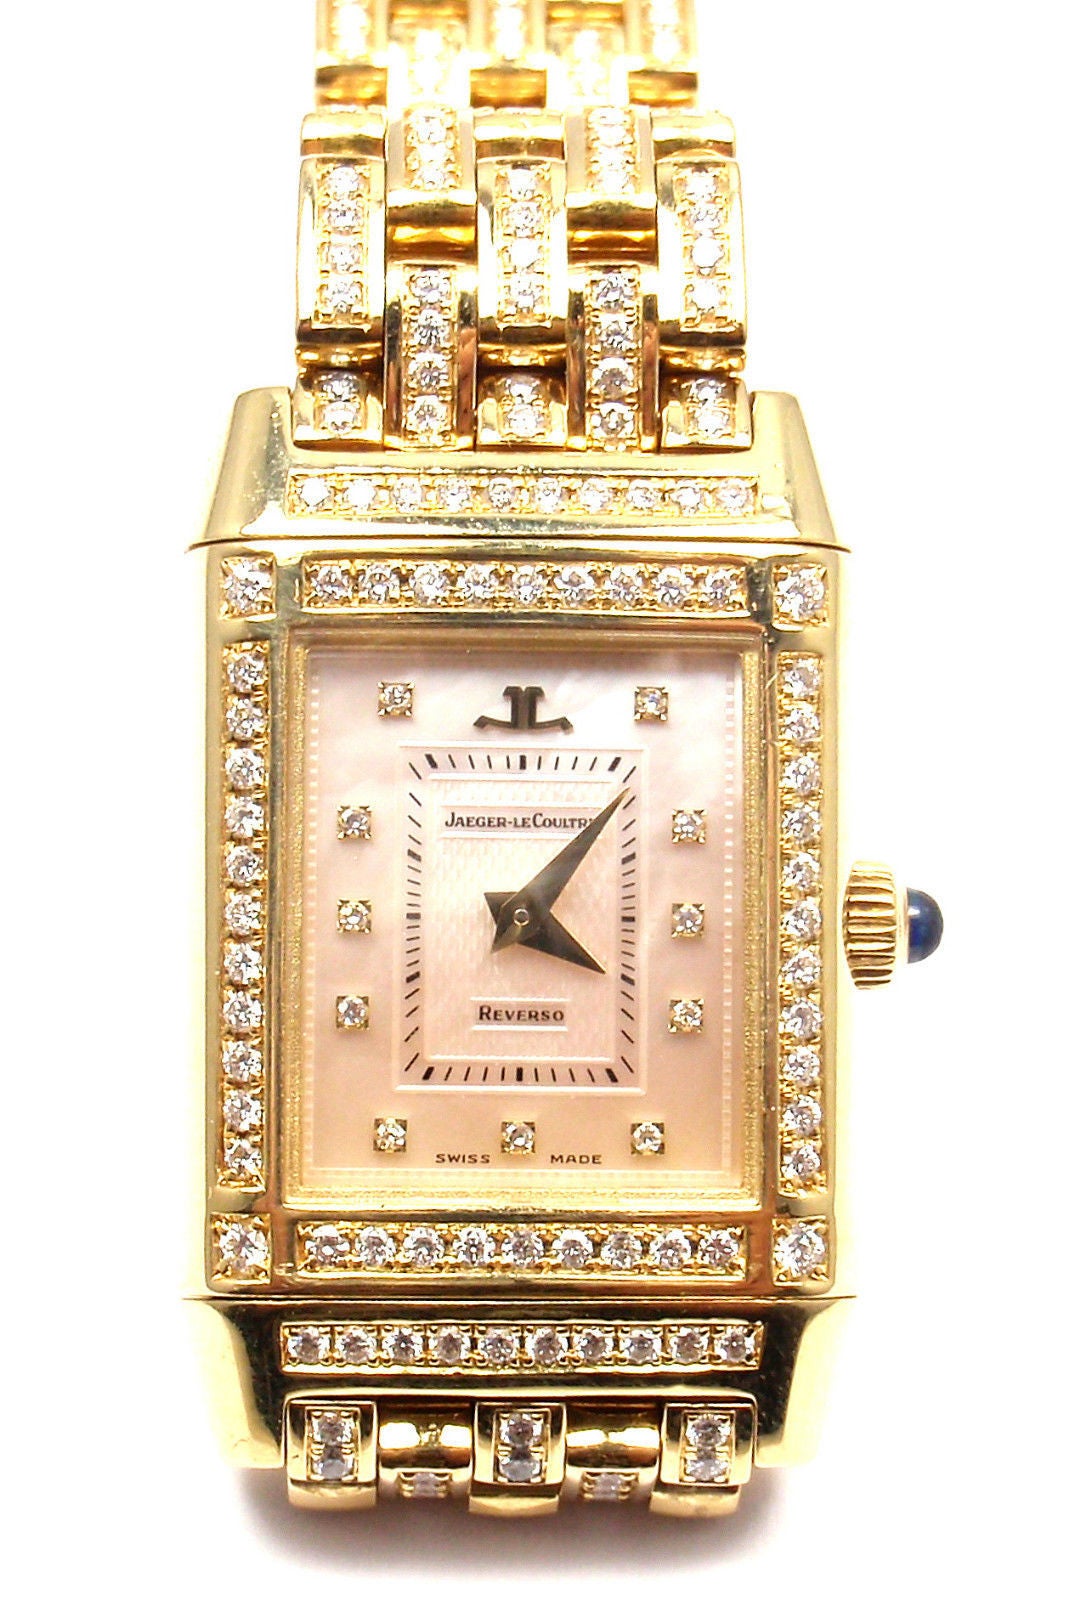 18k Yellow Gold Diamond Jaeger-Lecoultre Reverso Lady's Watch 

This watch is unworn and comes with all the papers and a box.

Brand:  Jaeger-Lecoultre

Reference:  Reverso 267.1.86

Bracelet/Strap:  18k Yellow Gold pave diamond bracelet